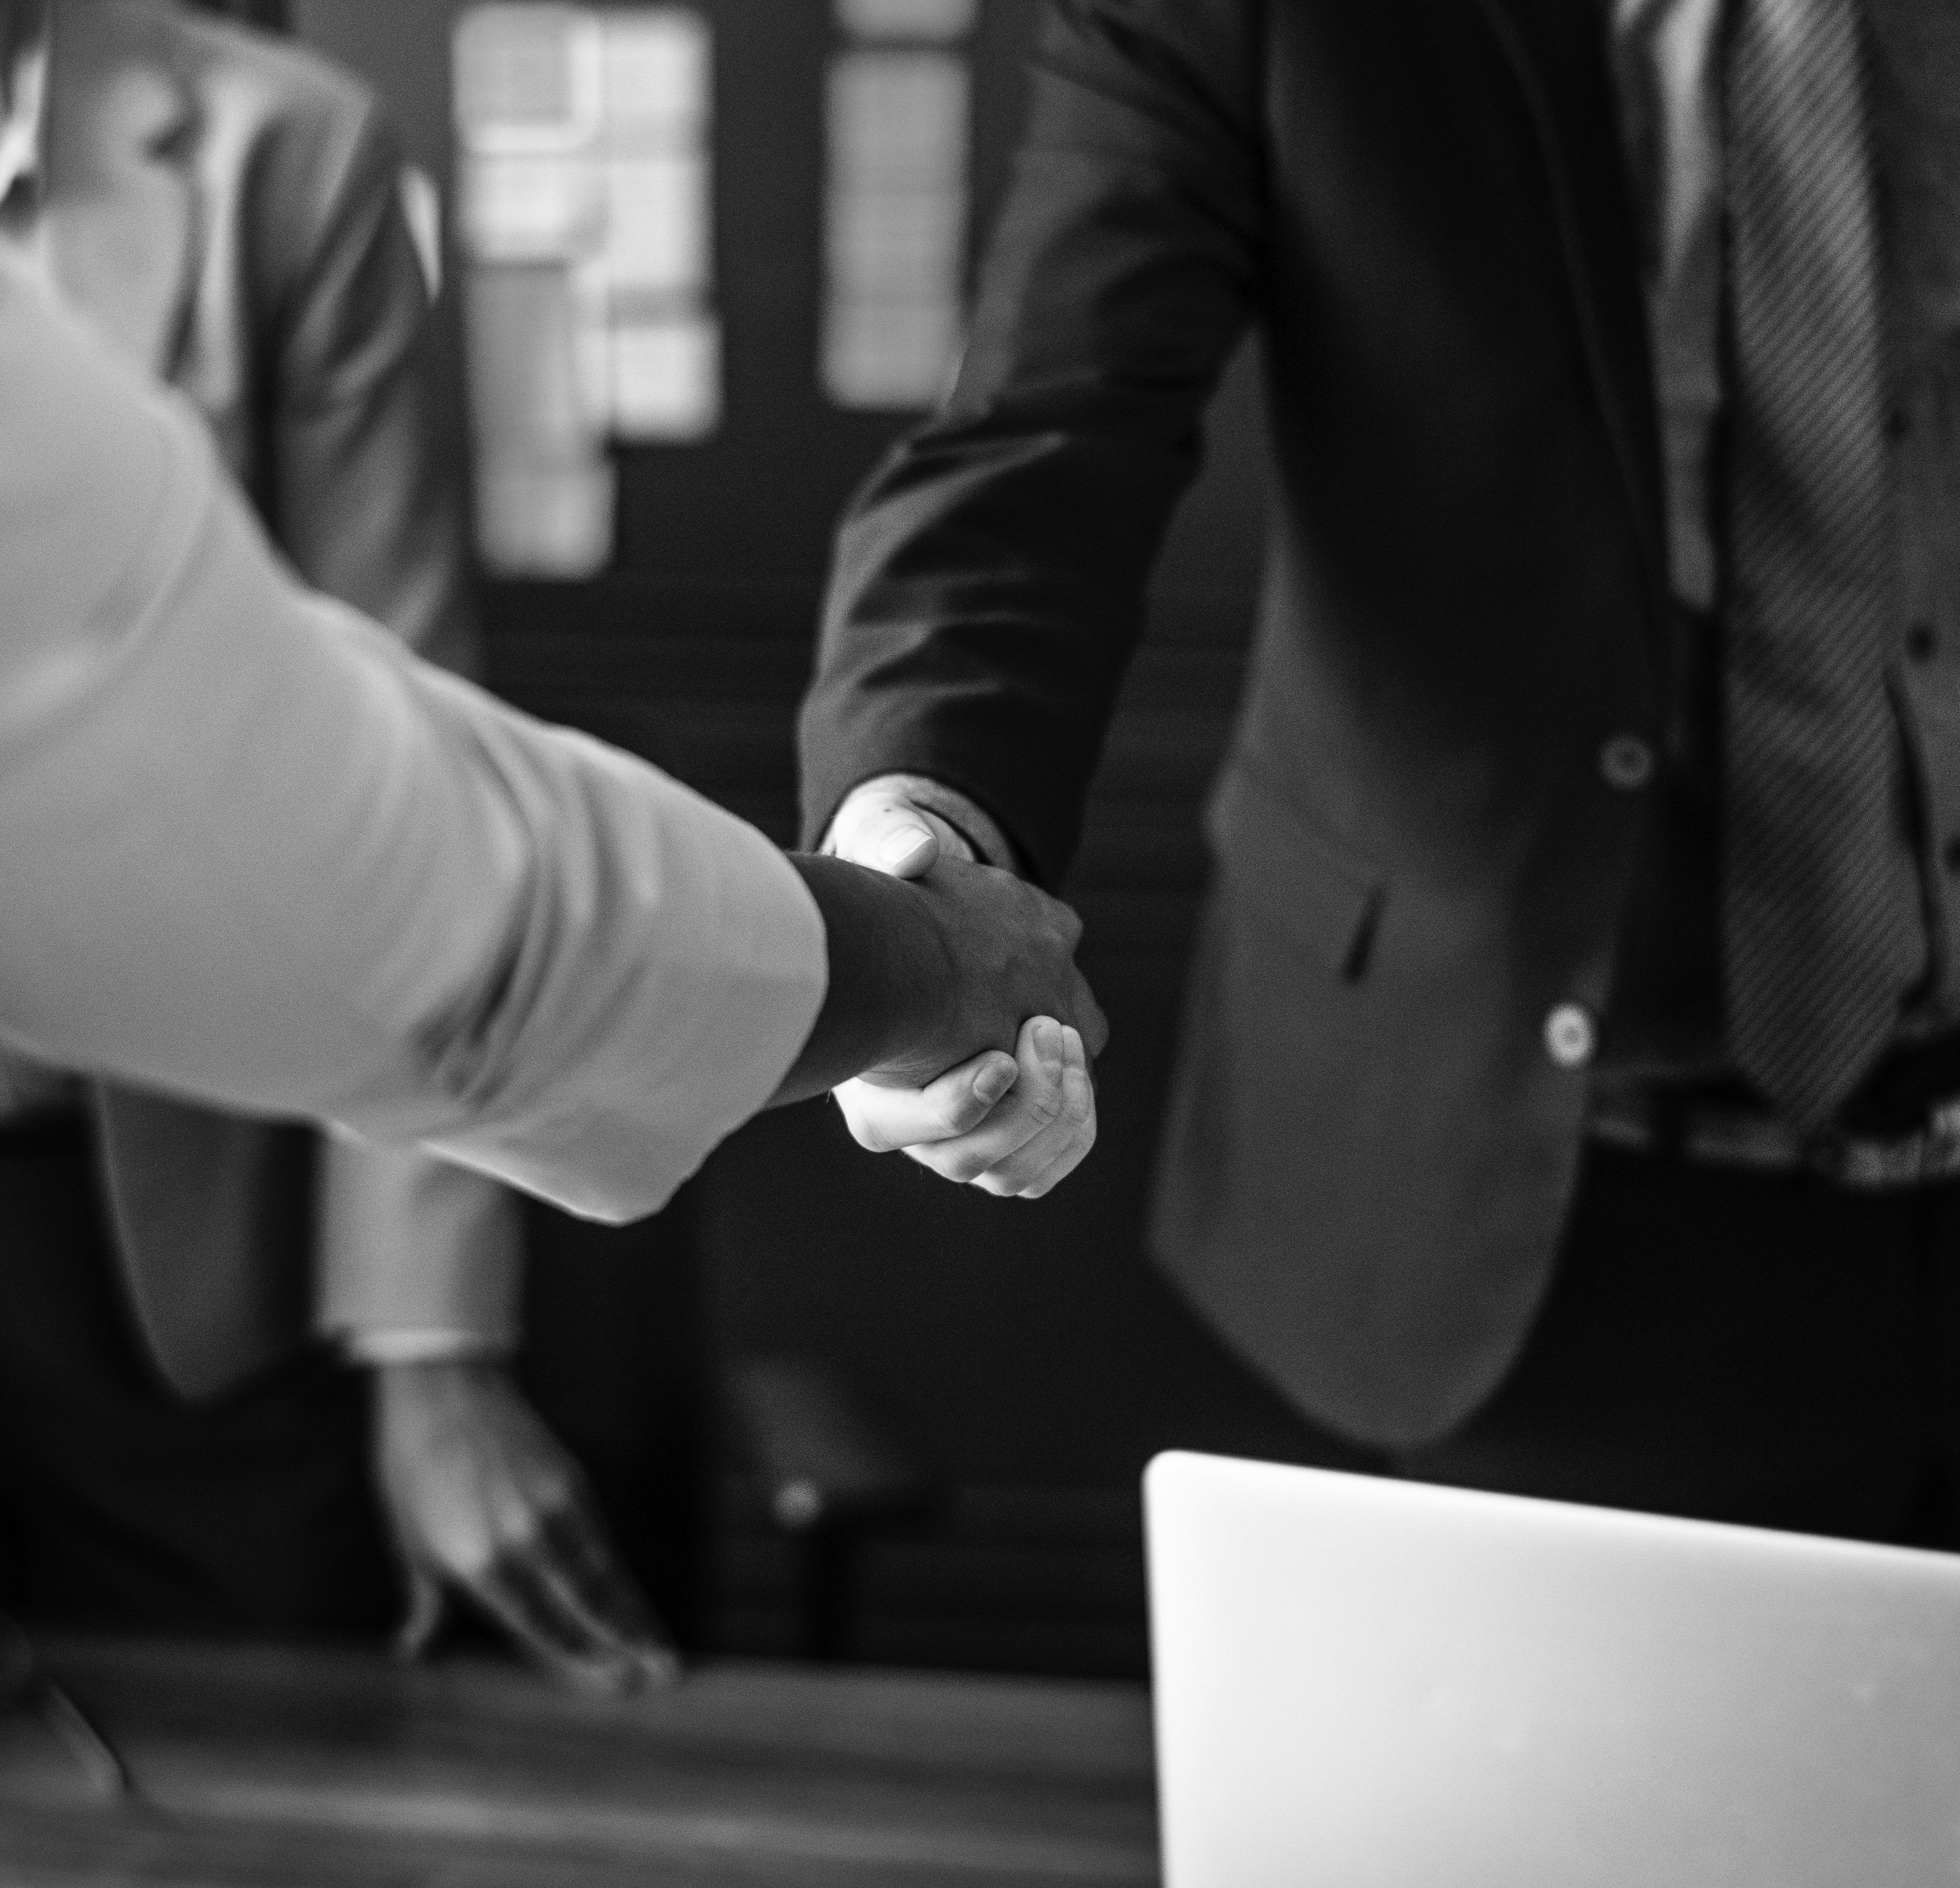 black and white image of two people shaking hands